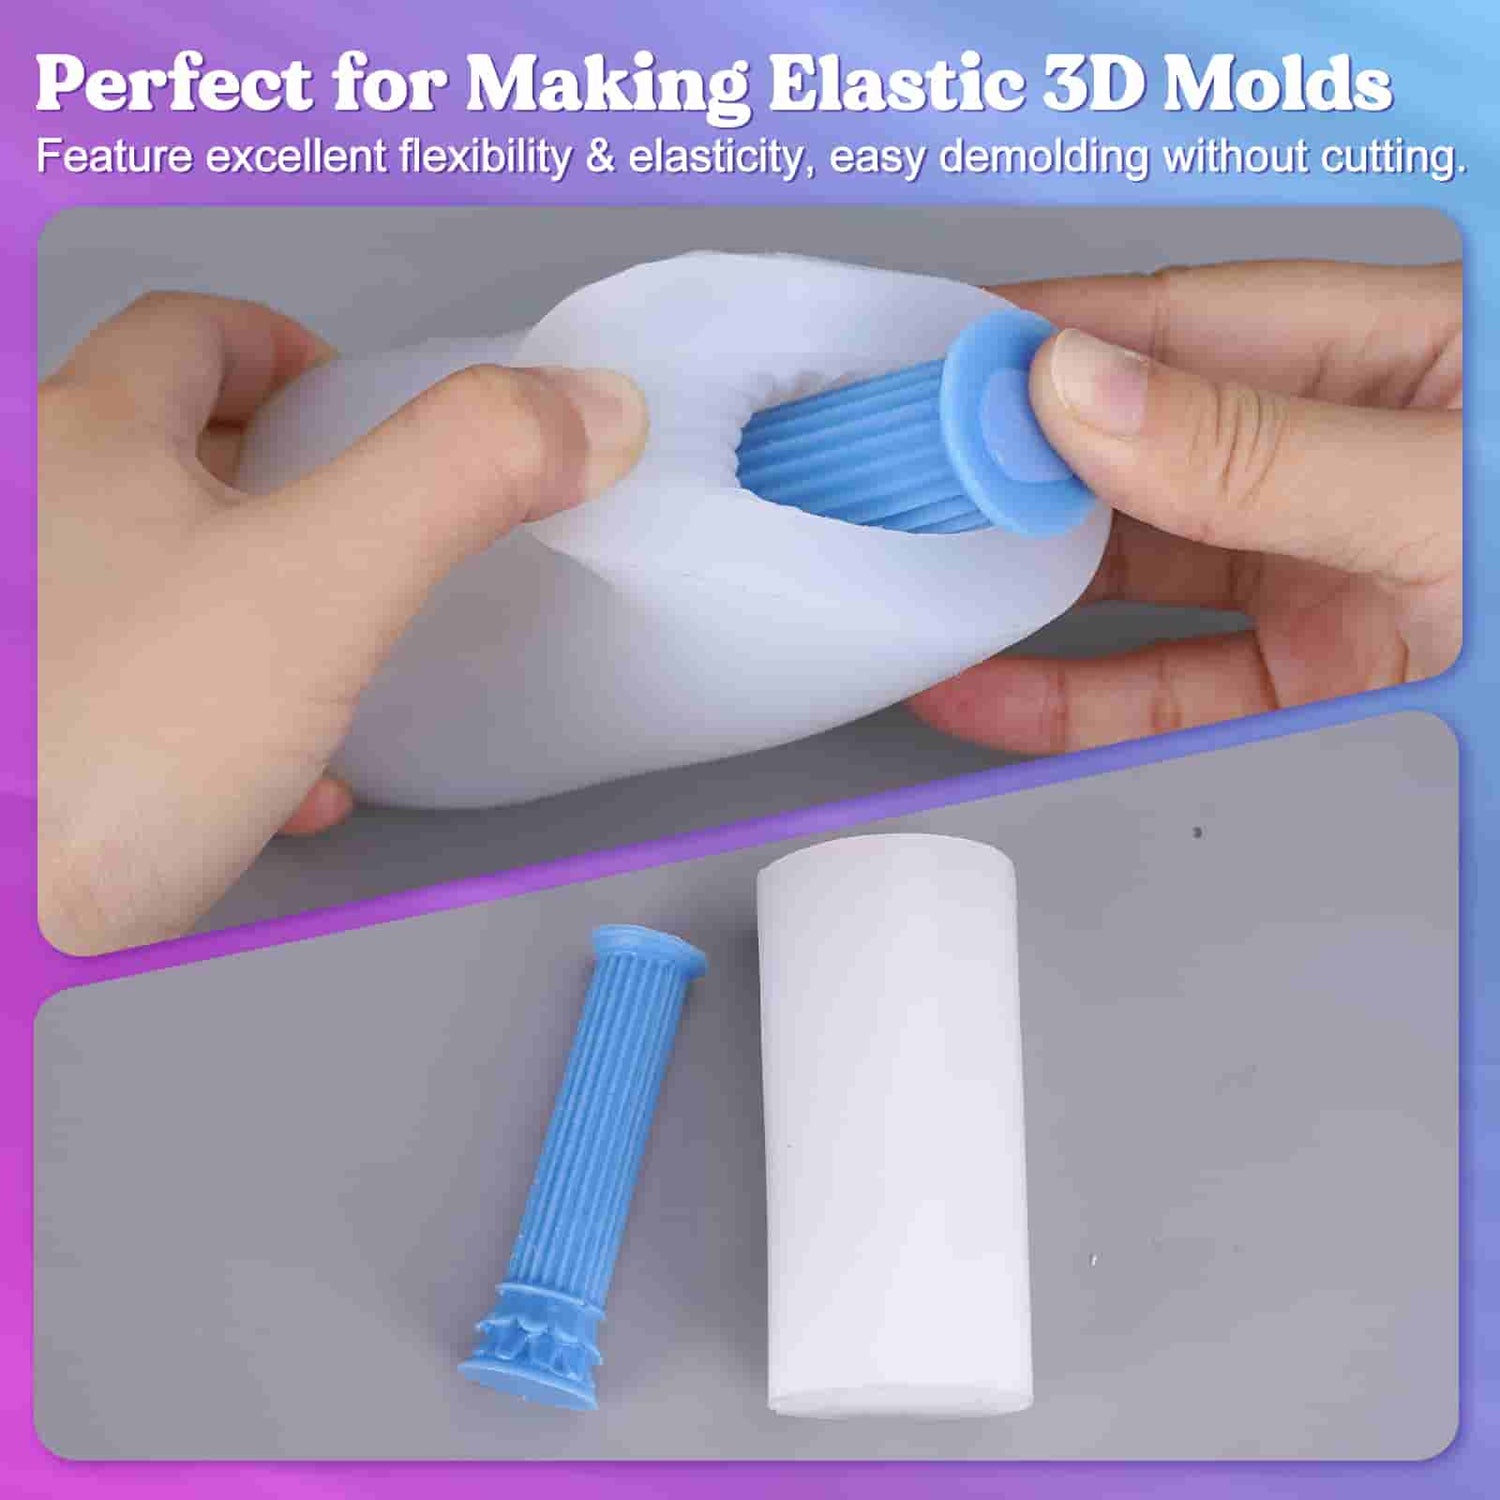 0A Silicone Mold Making Kit - 70.5oz